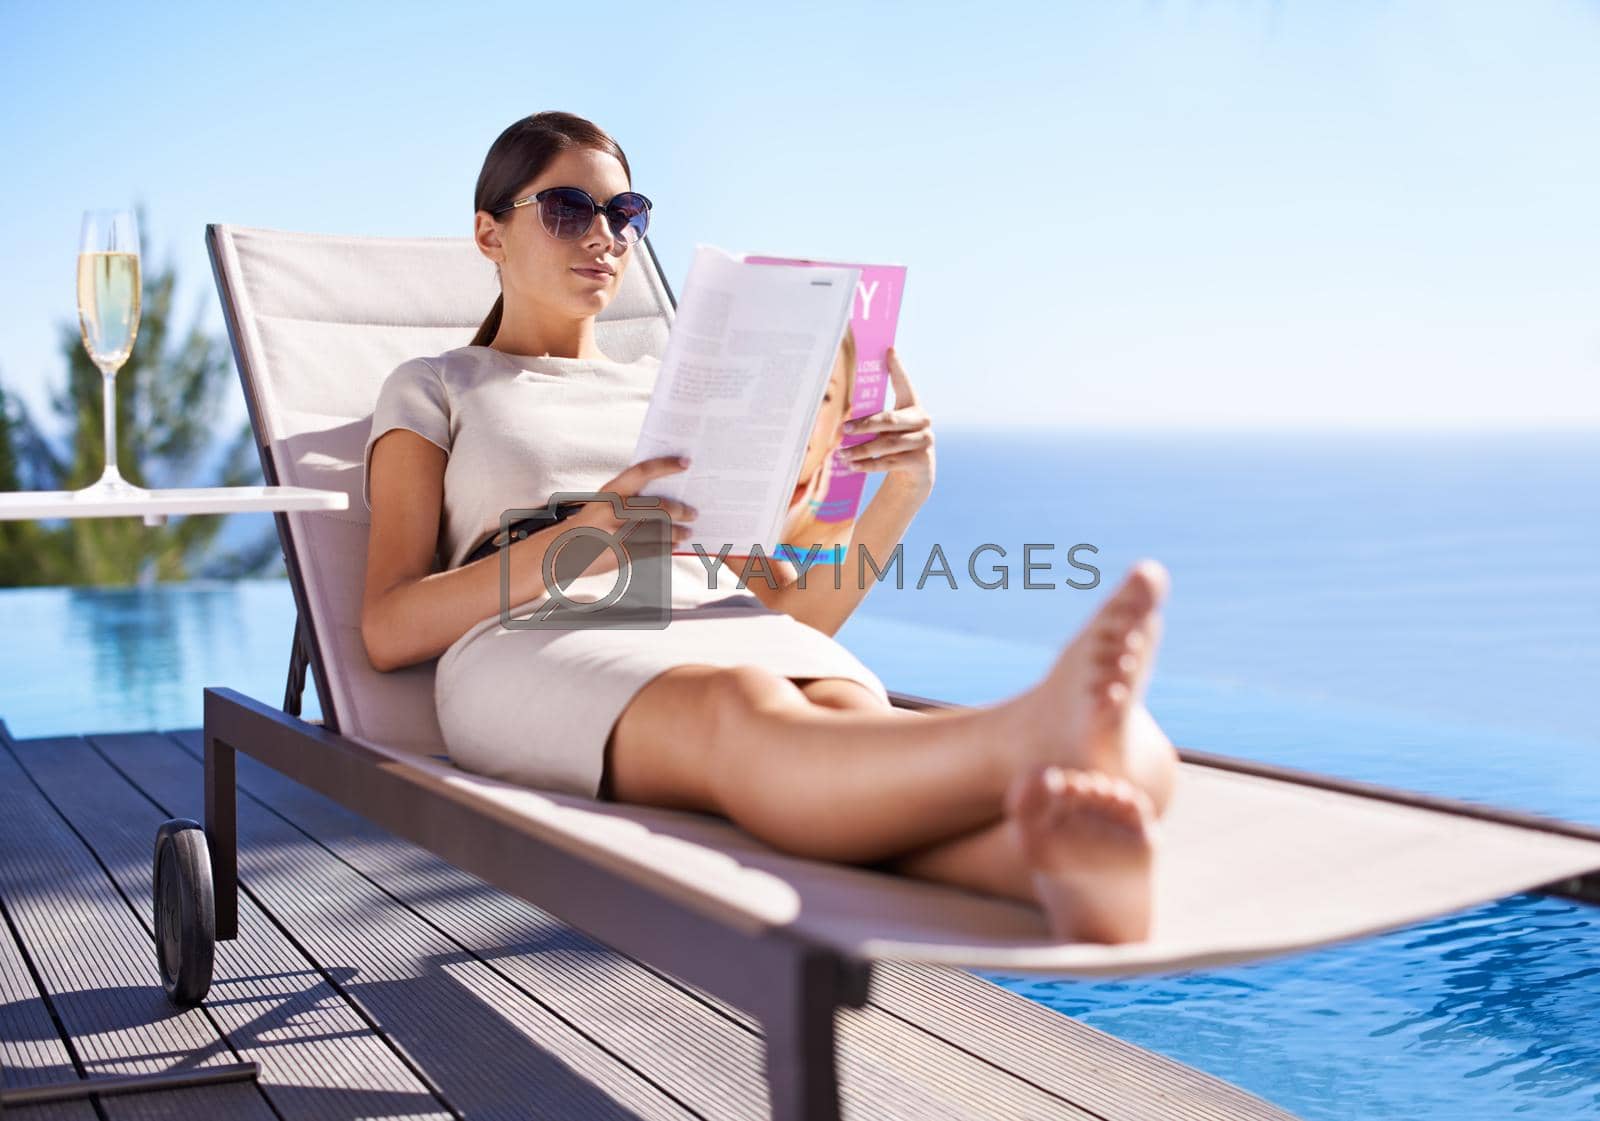 Royalty free image of Enjoying her vacation. An attractive young woman reading a magazine while lying on a deck chair. by YuriArcurs